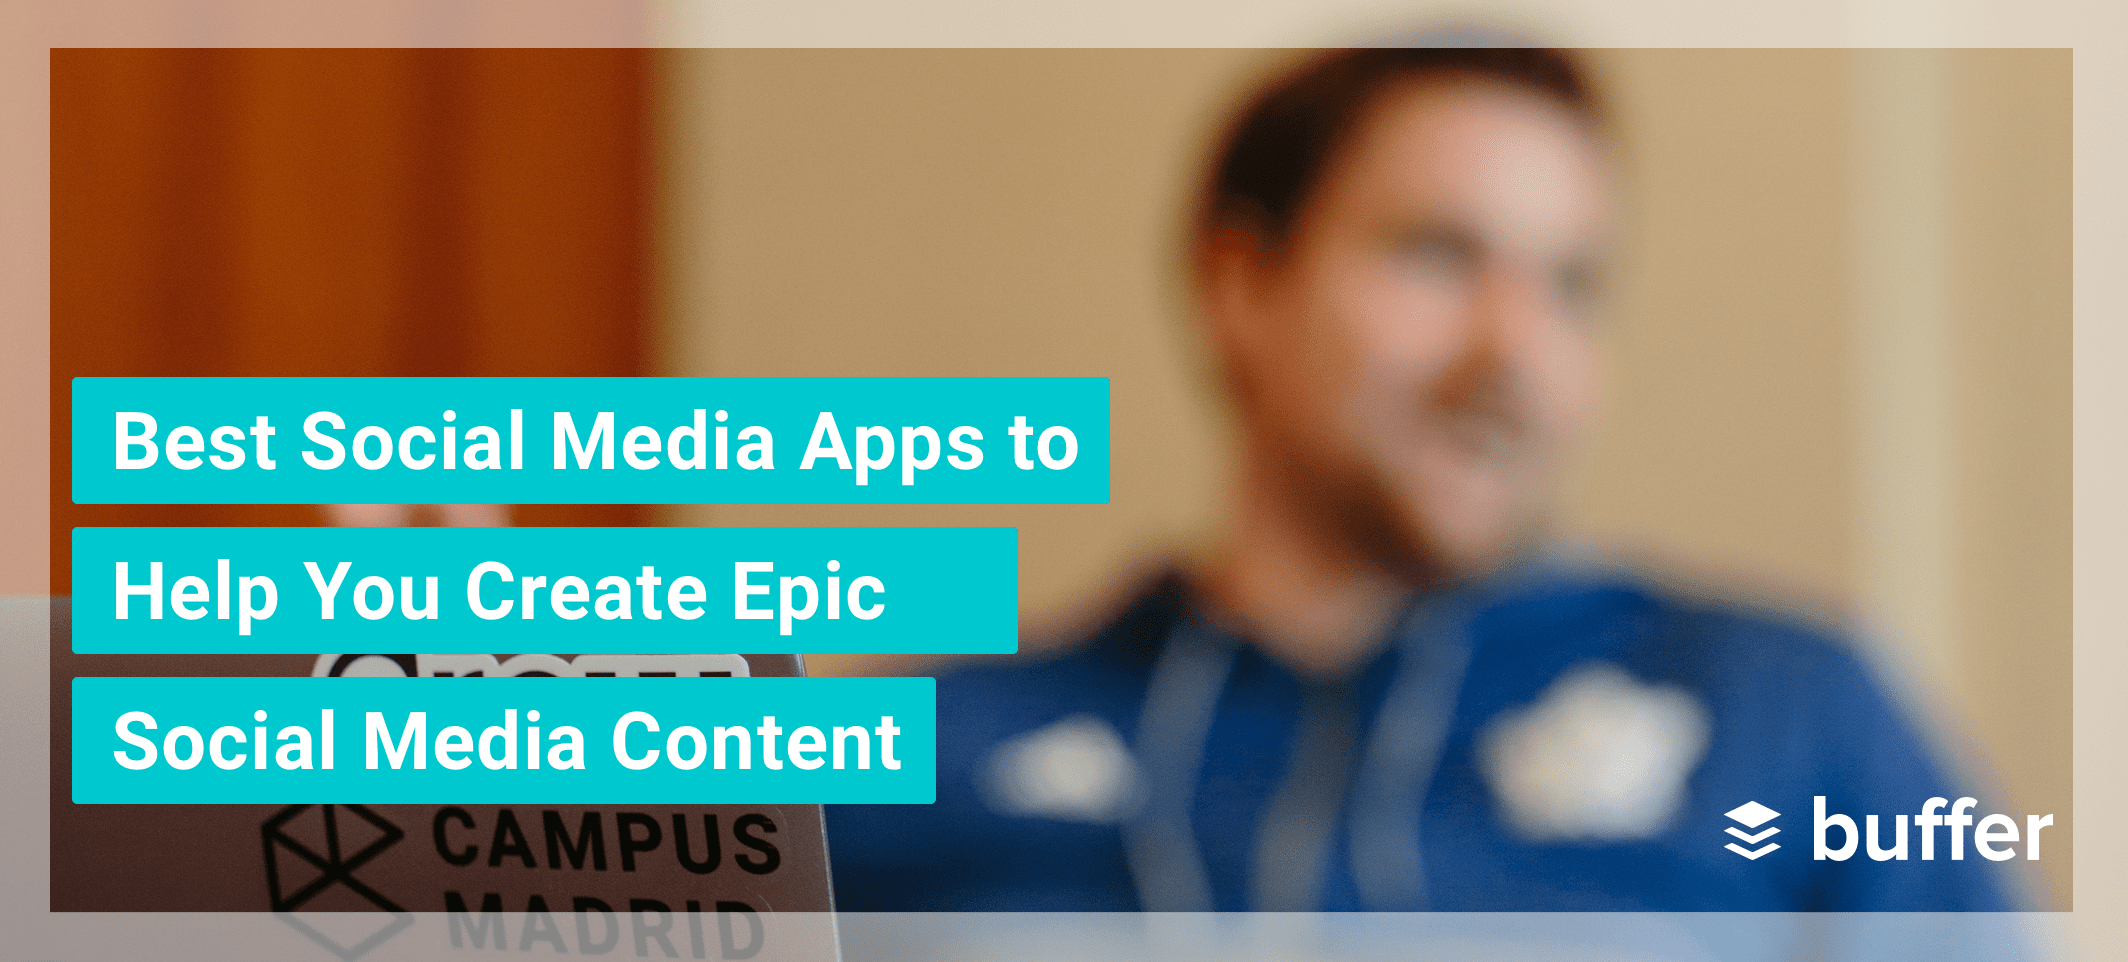 24 Best Social Media Apps to Help You Create Epic Social Media Content